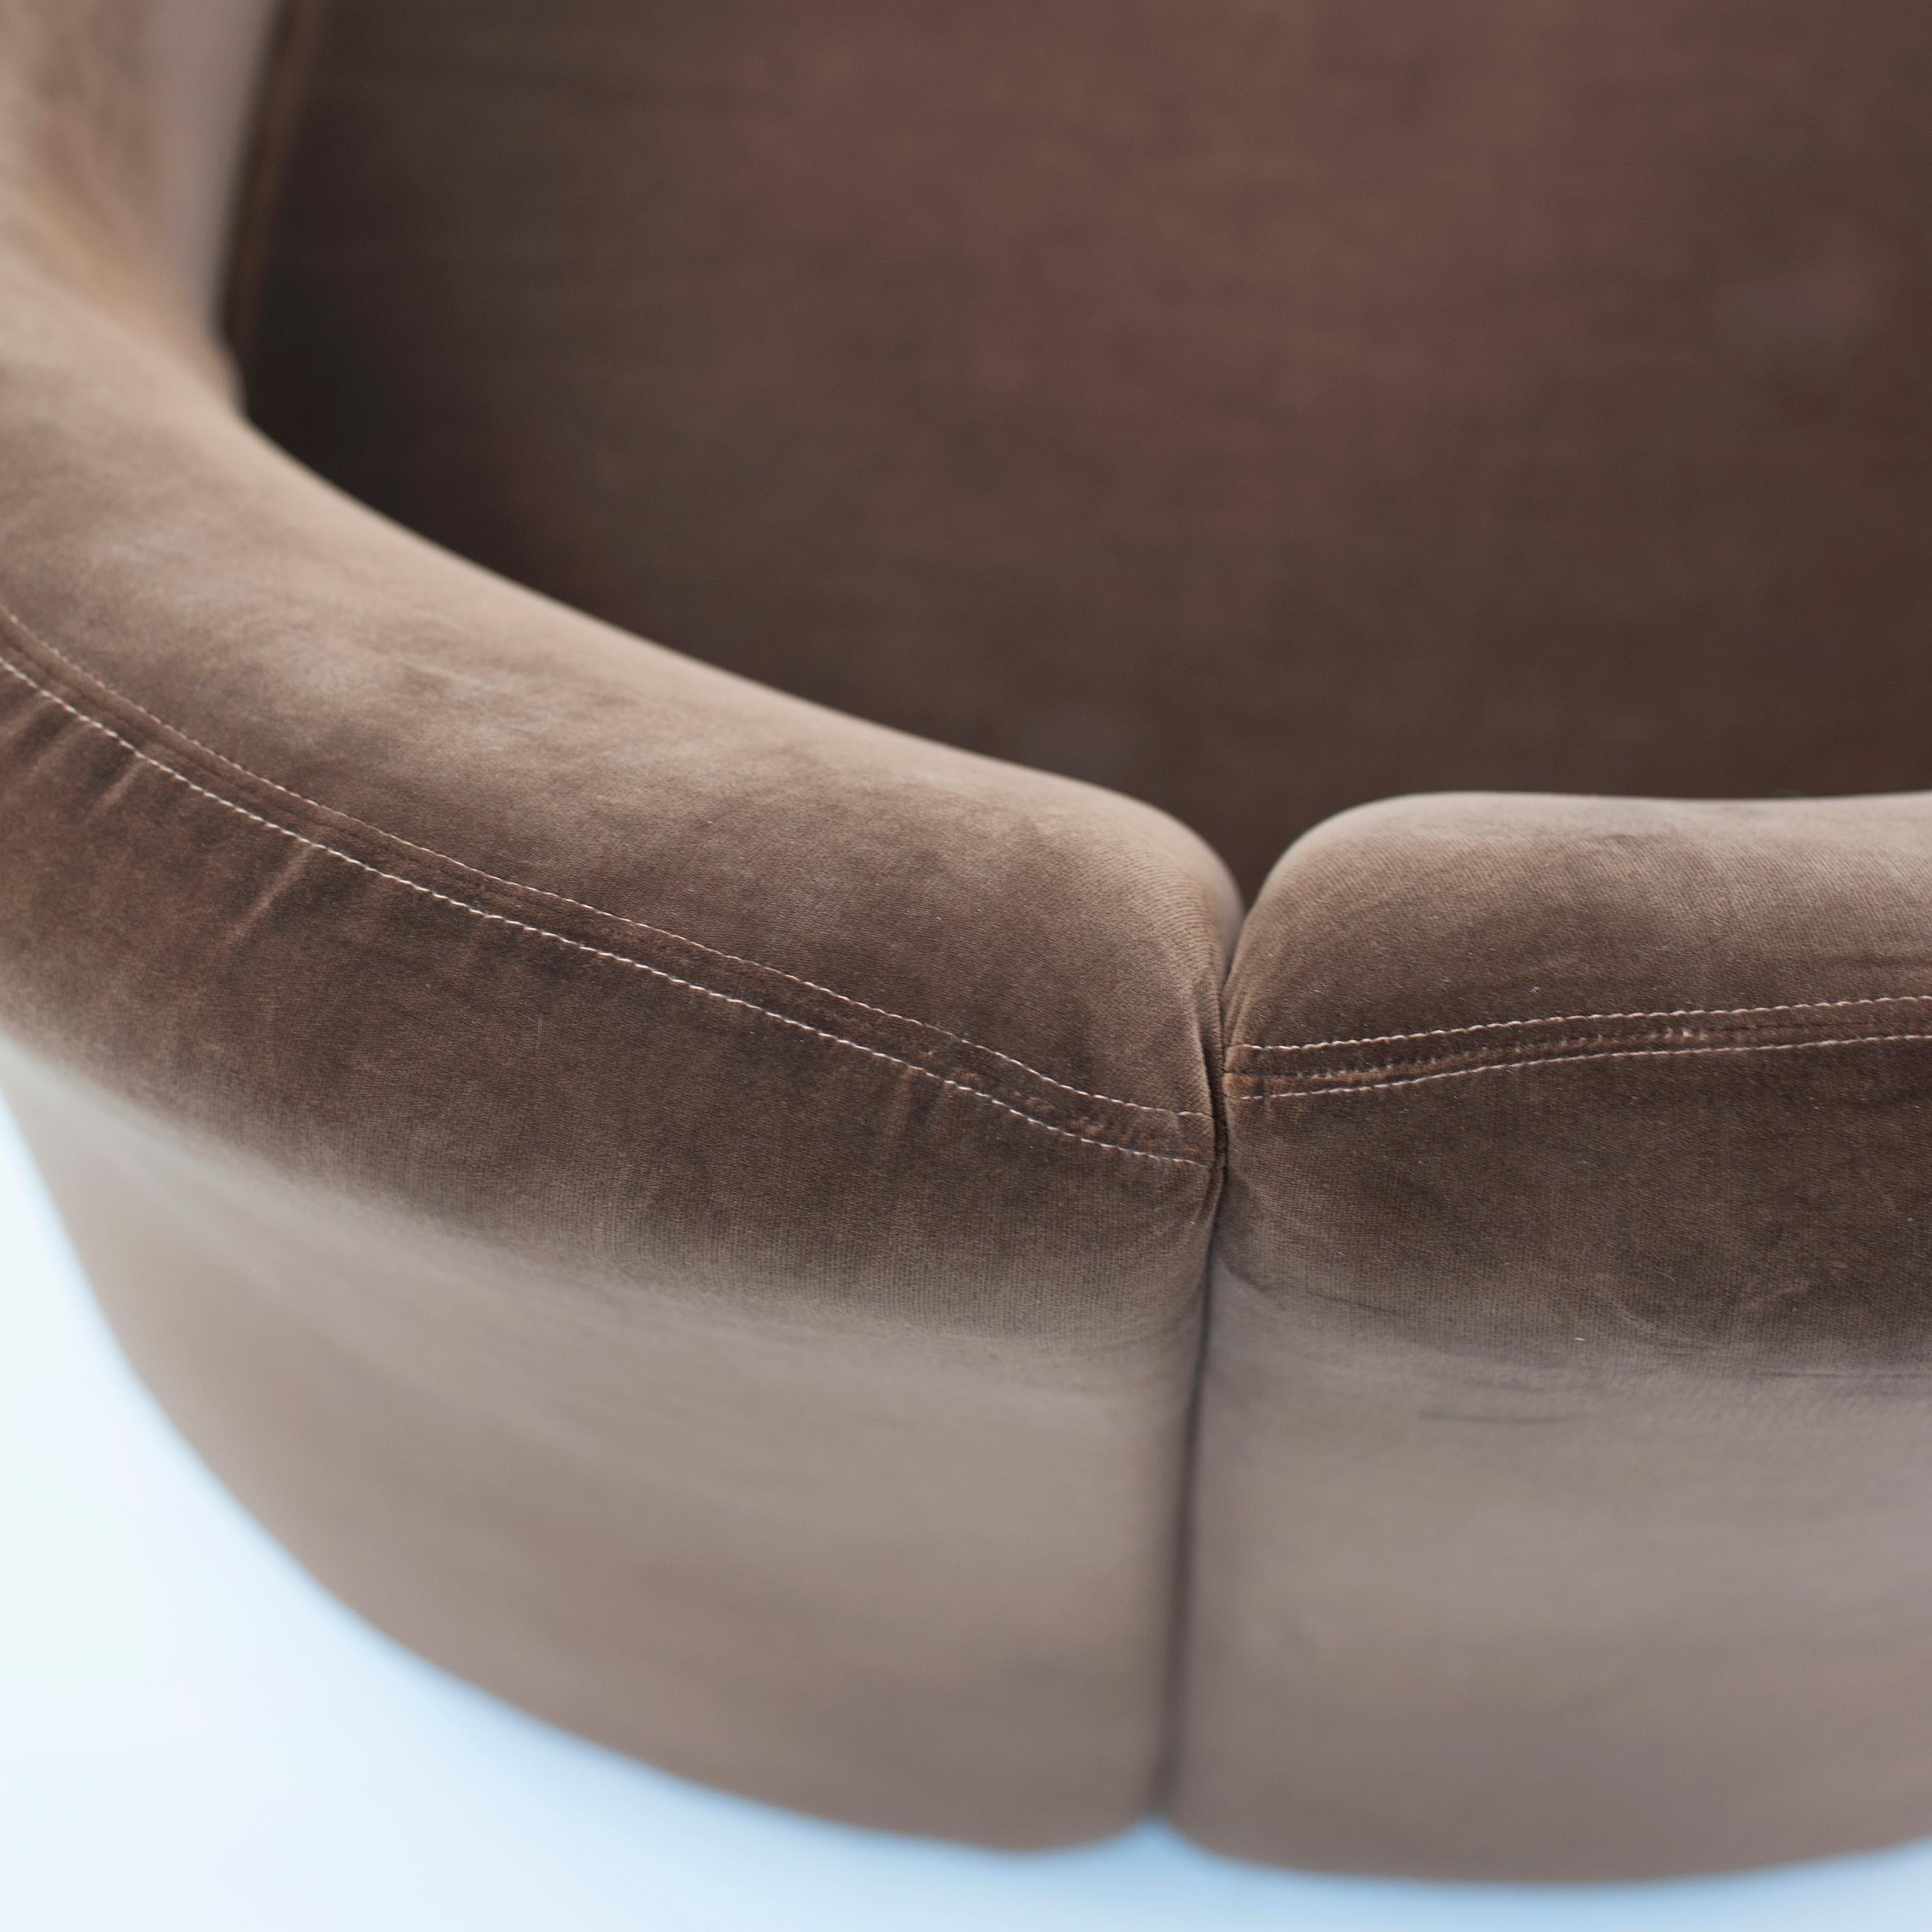 Brown velvet armchair designed by Eugenio Gerli for Tecno, Italy. These beautiful 'split back' armchair sit very comfortable. Good original condition. Four items available, sold as set of two.